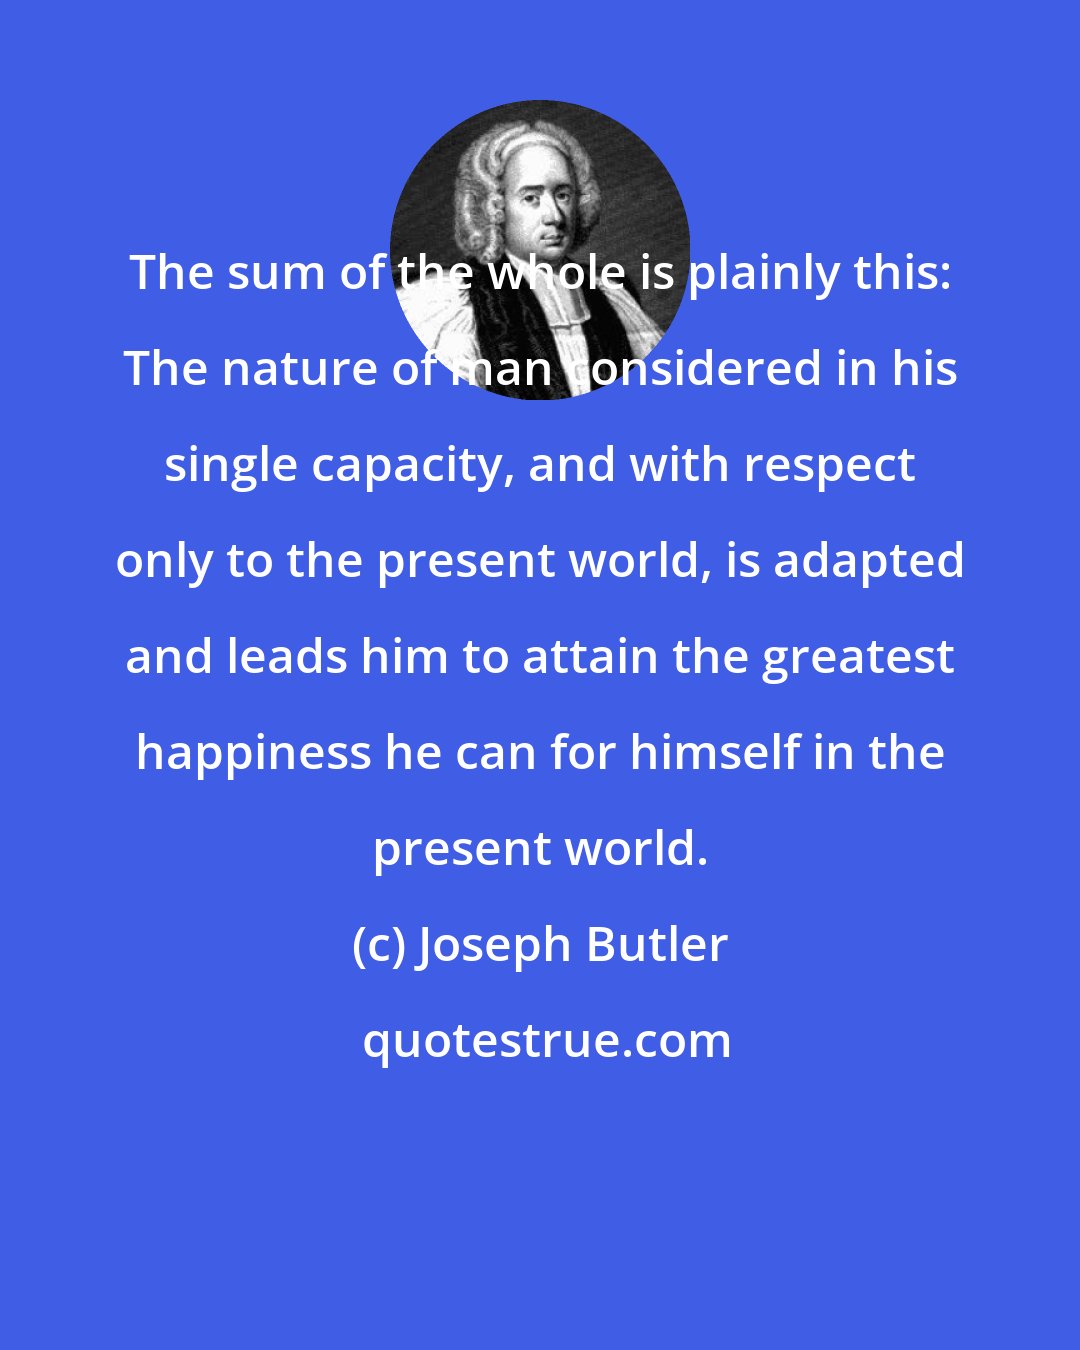 Joseph Butler: The sum of the whole is plainly this: The nature of man considered in his single capacity, and with respect only to the present world, is adapted and leads him to attain the greatest happiness he can for himself in the present world.